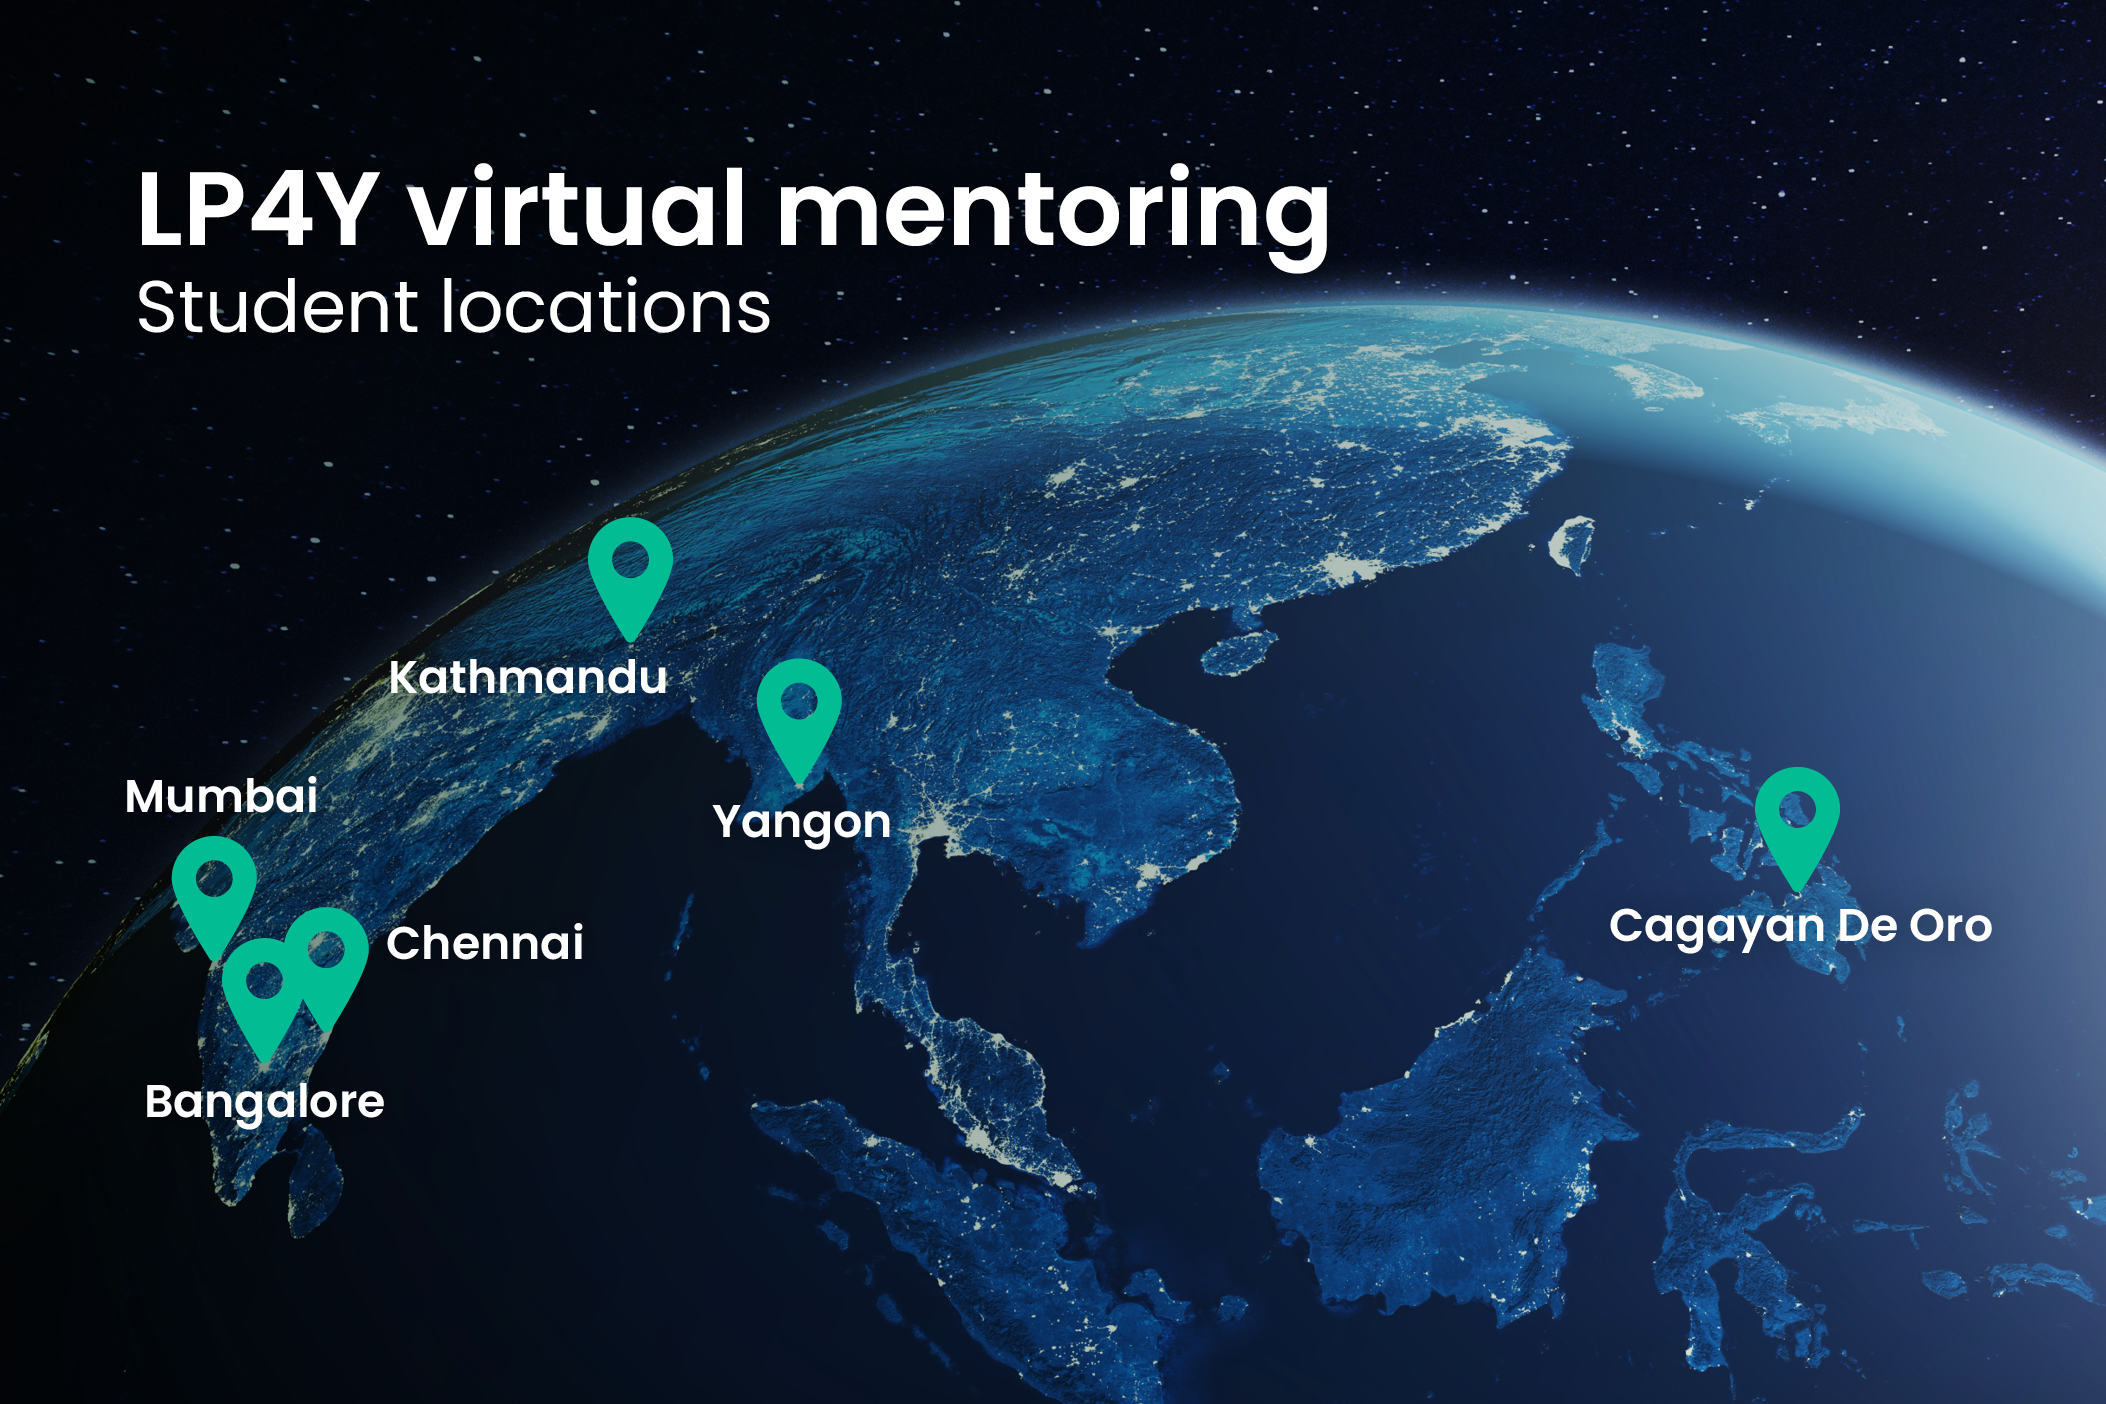 Locations of students participating in a virtual mentoring program